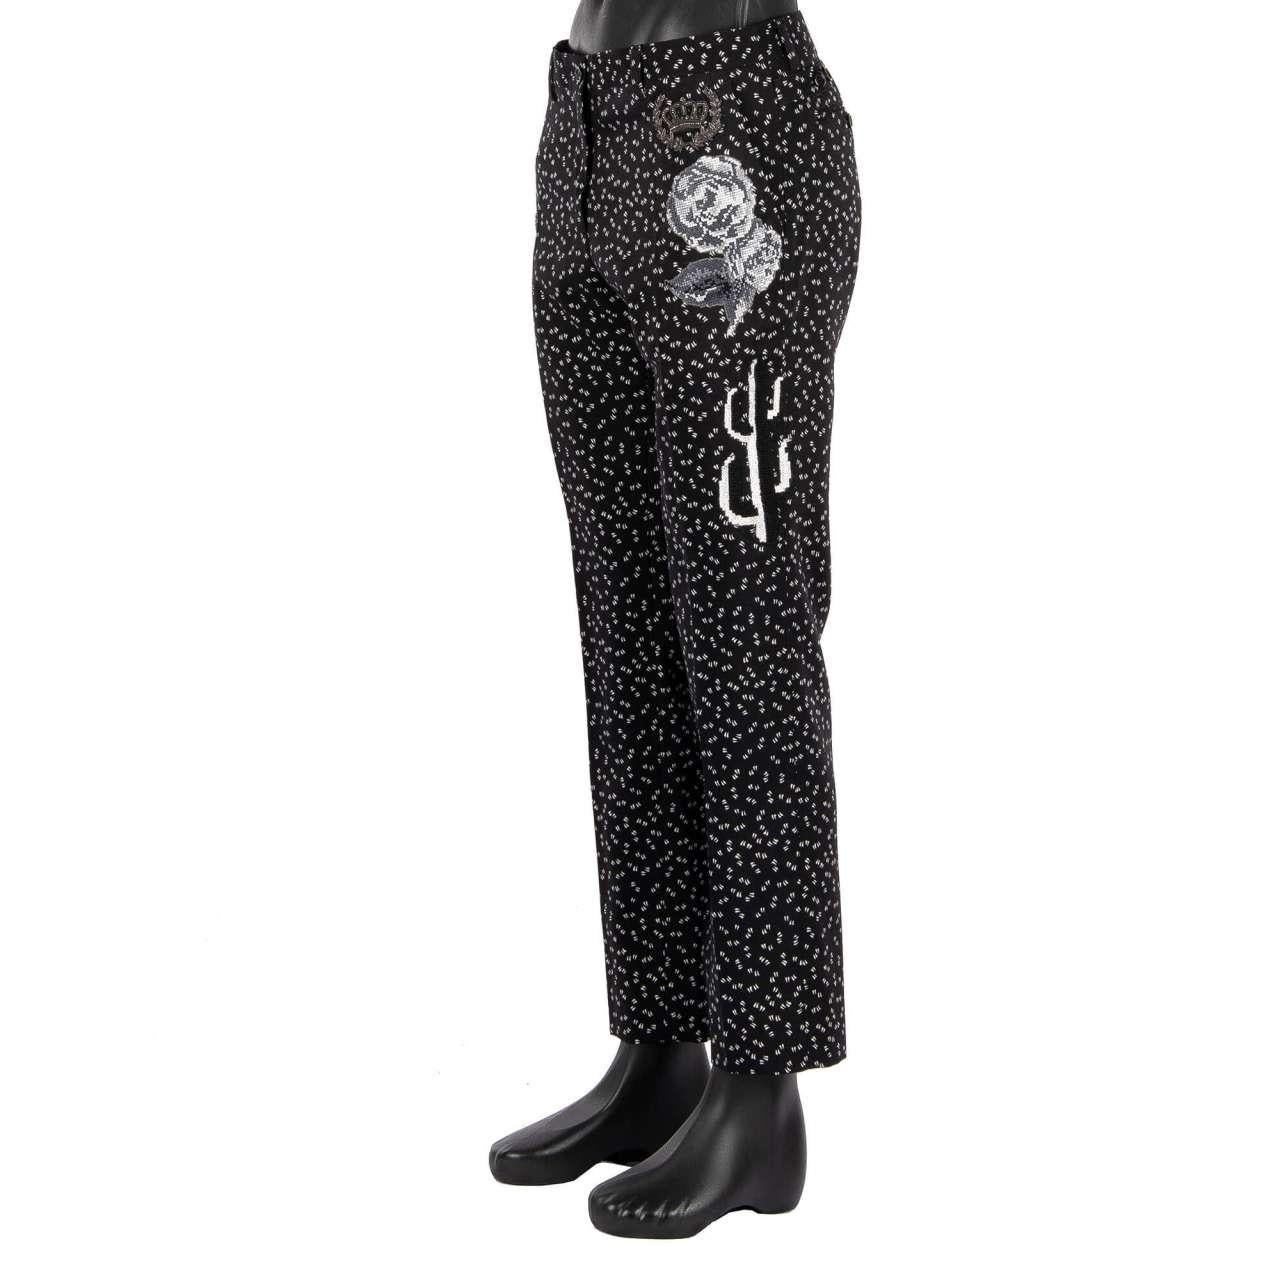 - Printed Classic / Dress Virgin Wool Trousers with flowers, crown and bee embroidery by DOLCE & GABBANA - New with tag - MADE IN ITALY - Former RRP: EUR 1.450 - Tailored F- Model: G6OJEZ-FS2B1-HN013 - Material: 100% Virgin Wool - Embroidery: 23%